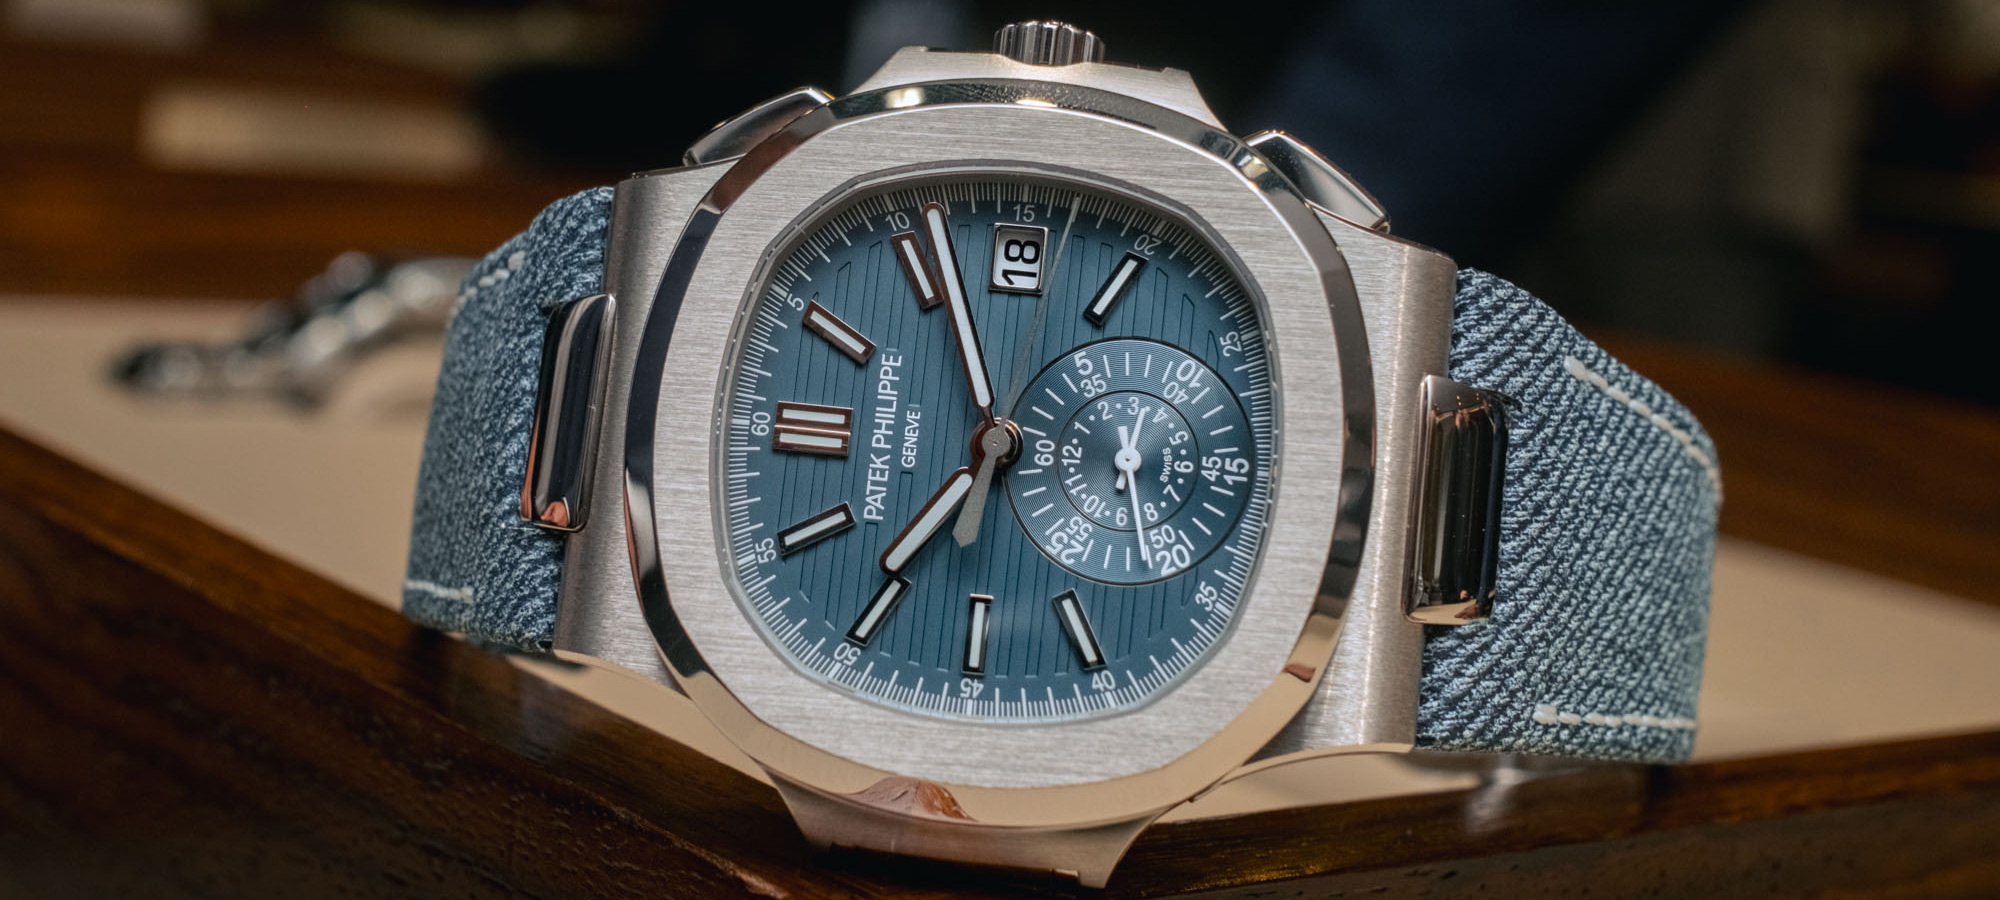 Hands-On: Patek Philippe Nautilus Flyback Chronograph Reference 5980/60G-001 Watch | aBlogtoWatch